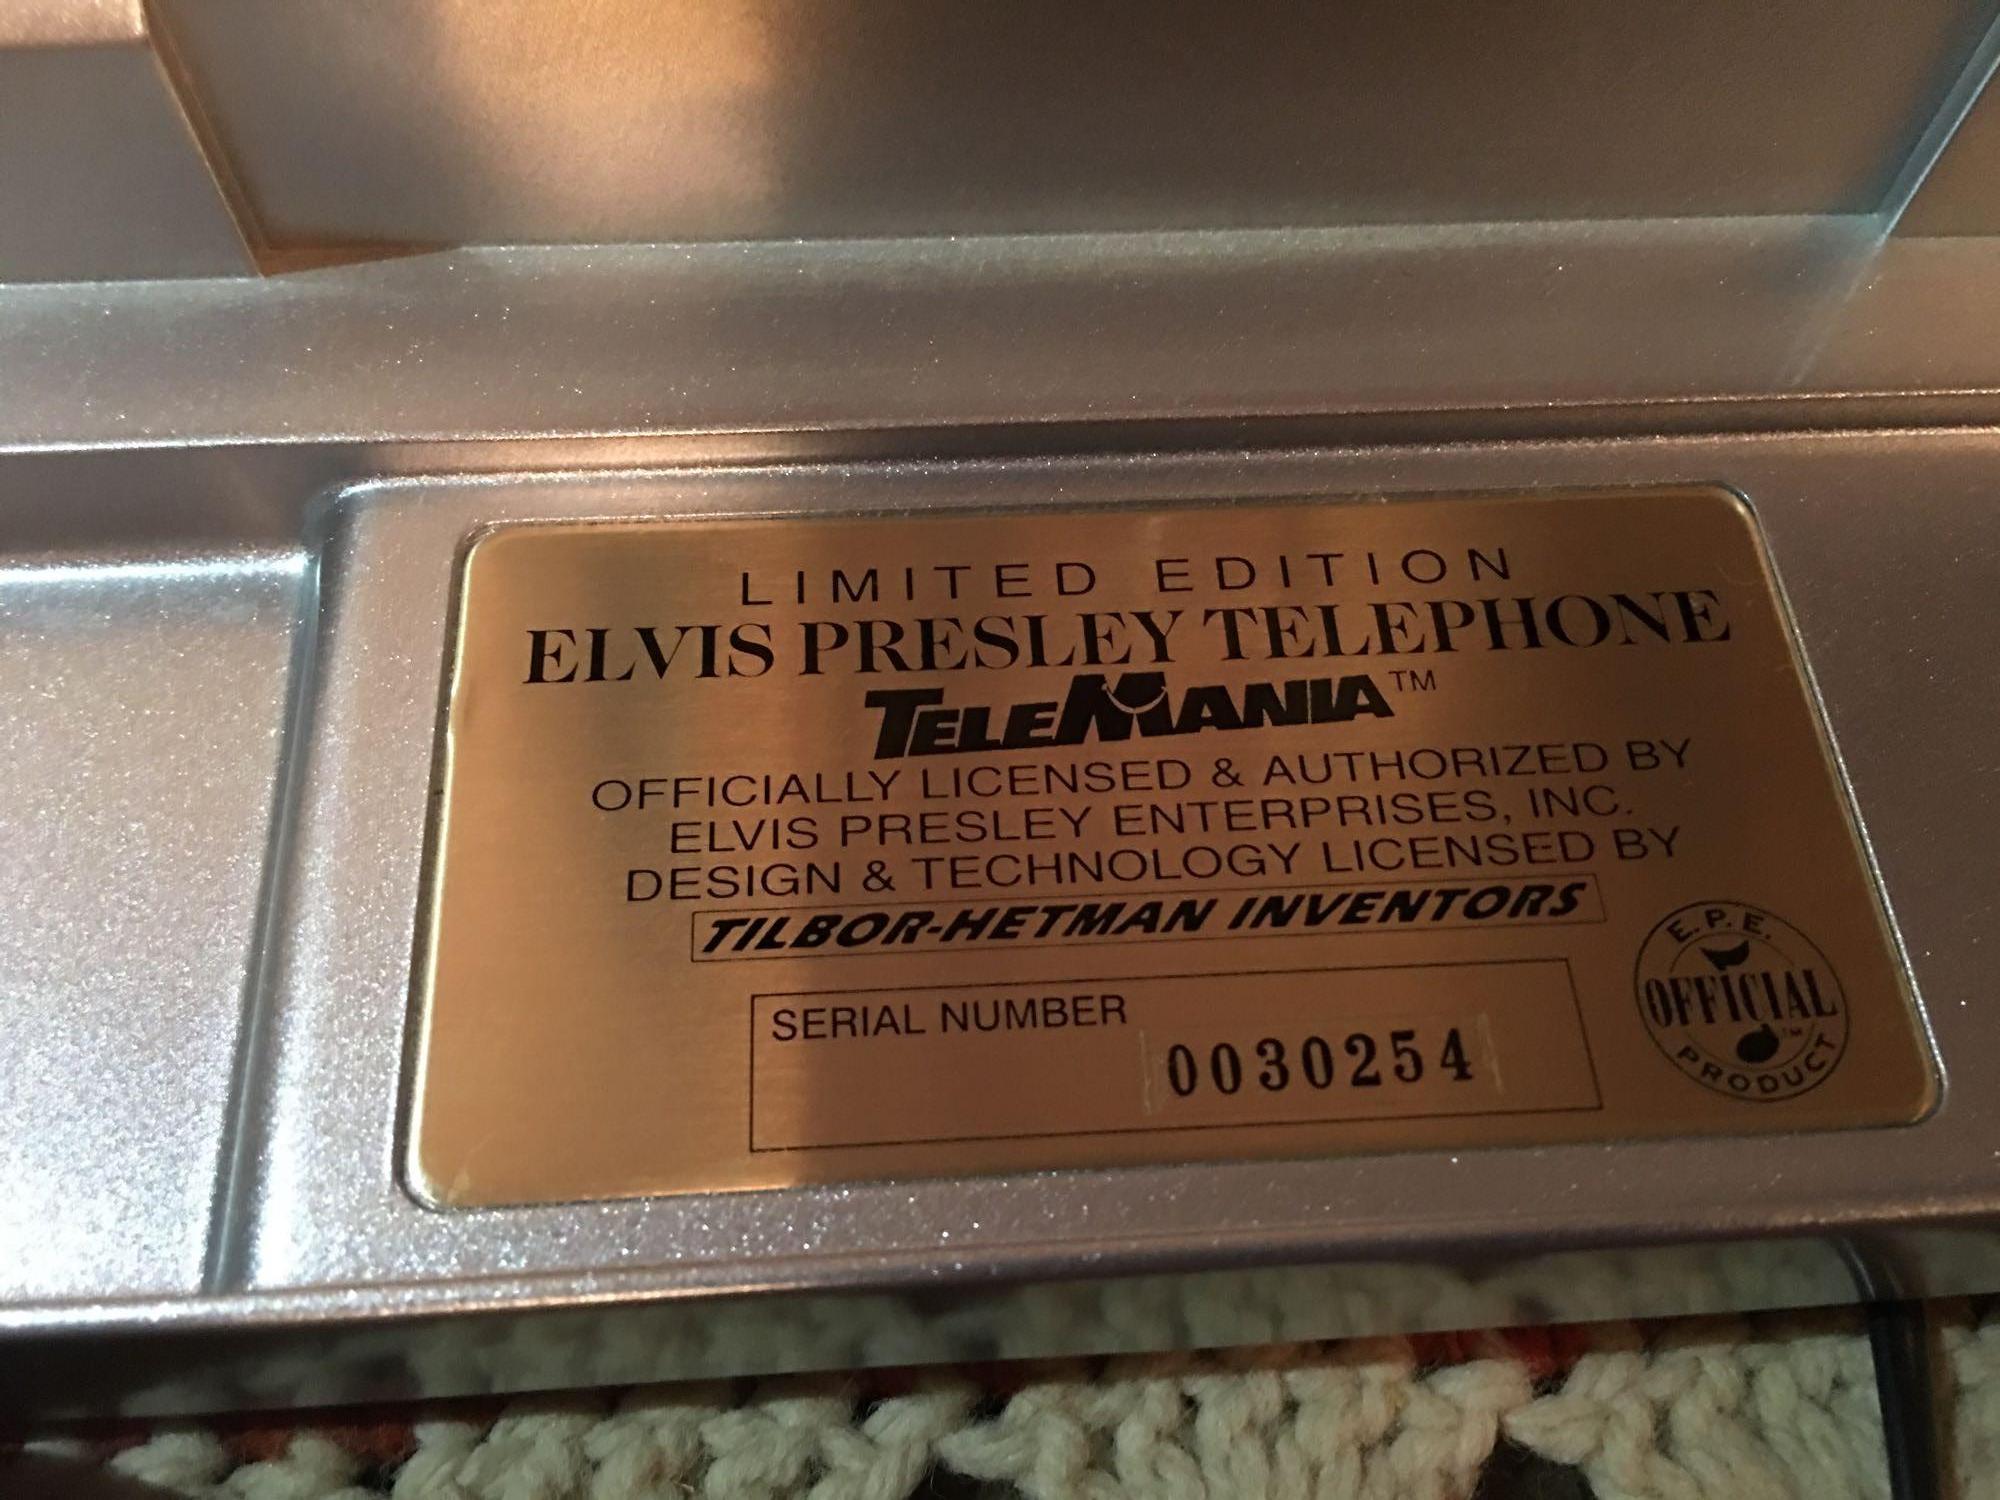 Limited edition Elvis Presley telephone officially licensed and authorized by Elvis Presley Ent Inc.